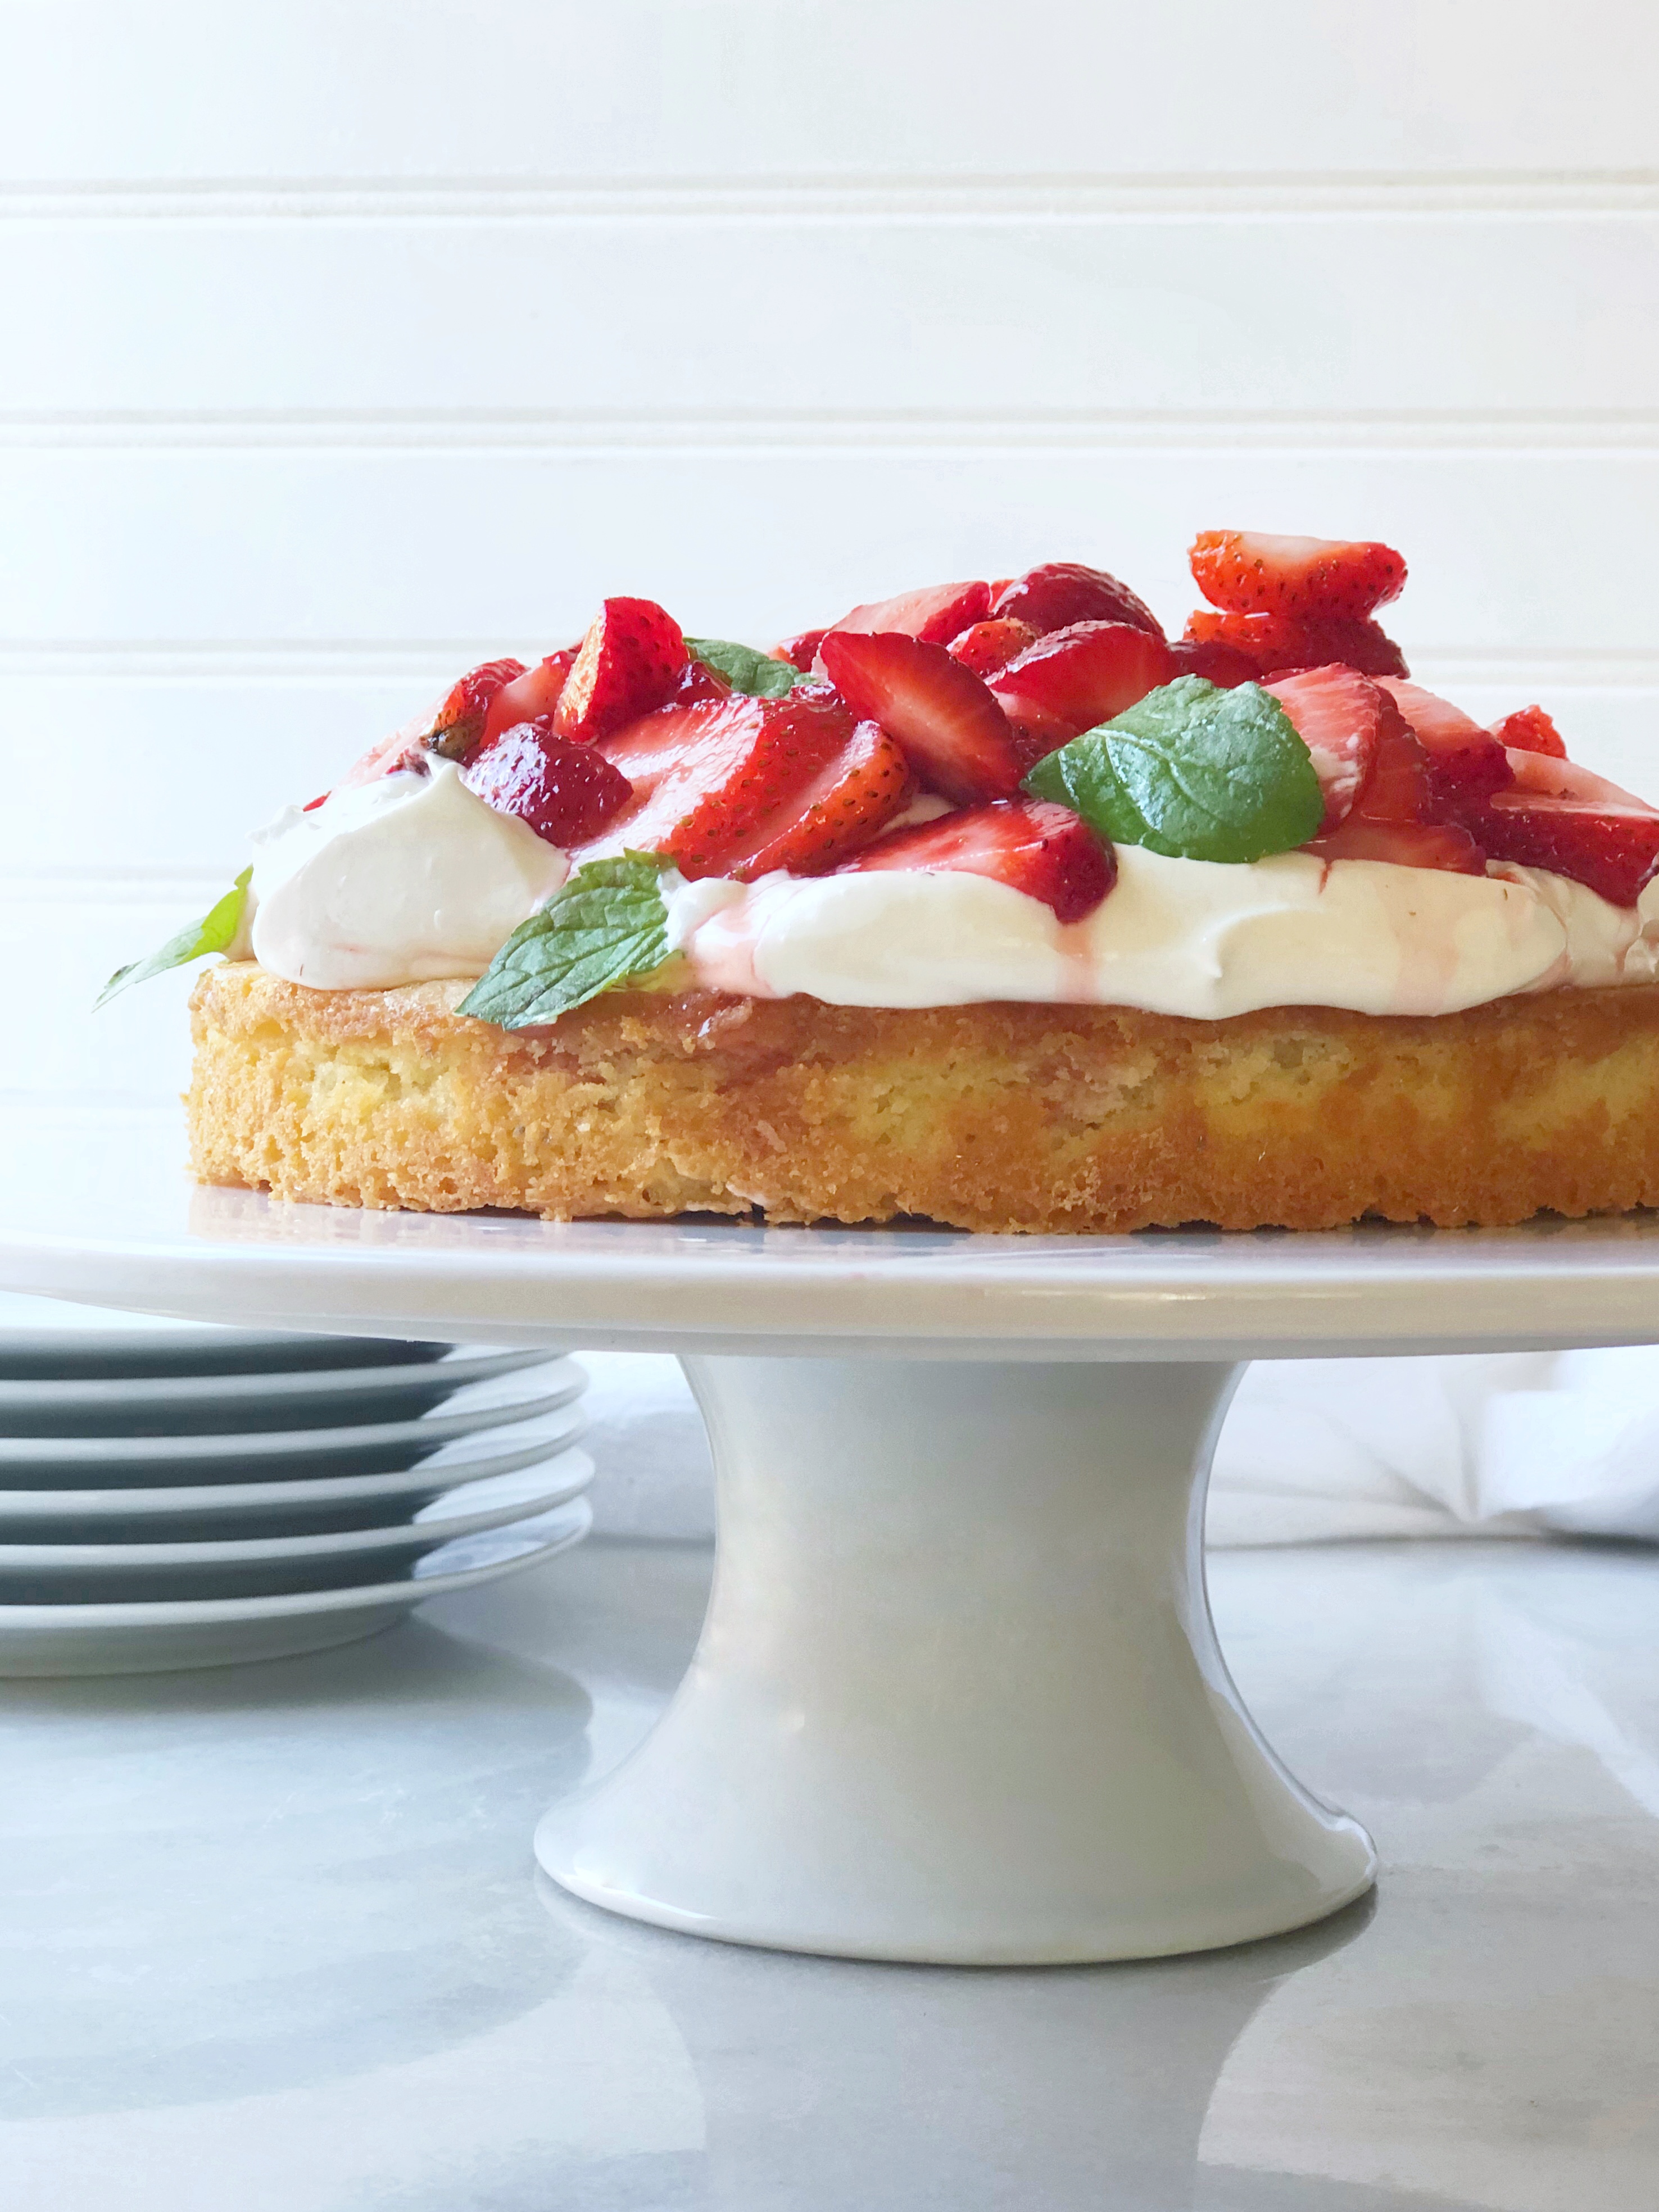 Strawberry shortbread cake with fresh strawberries and whipped cream